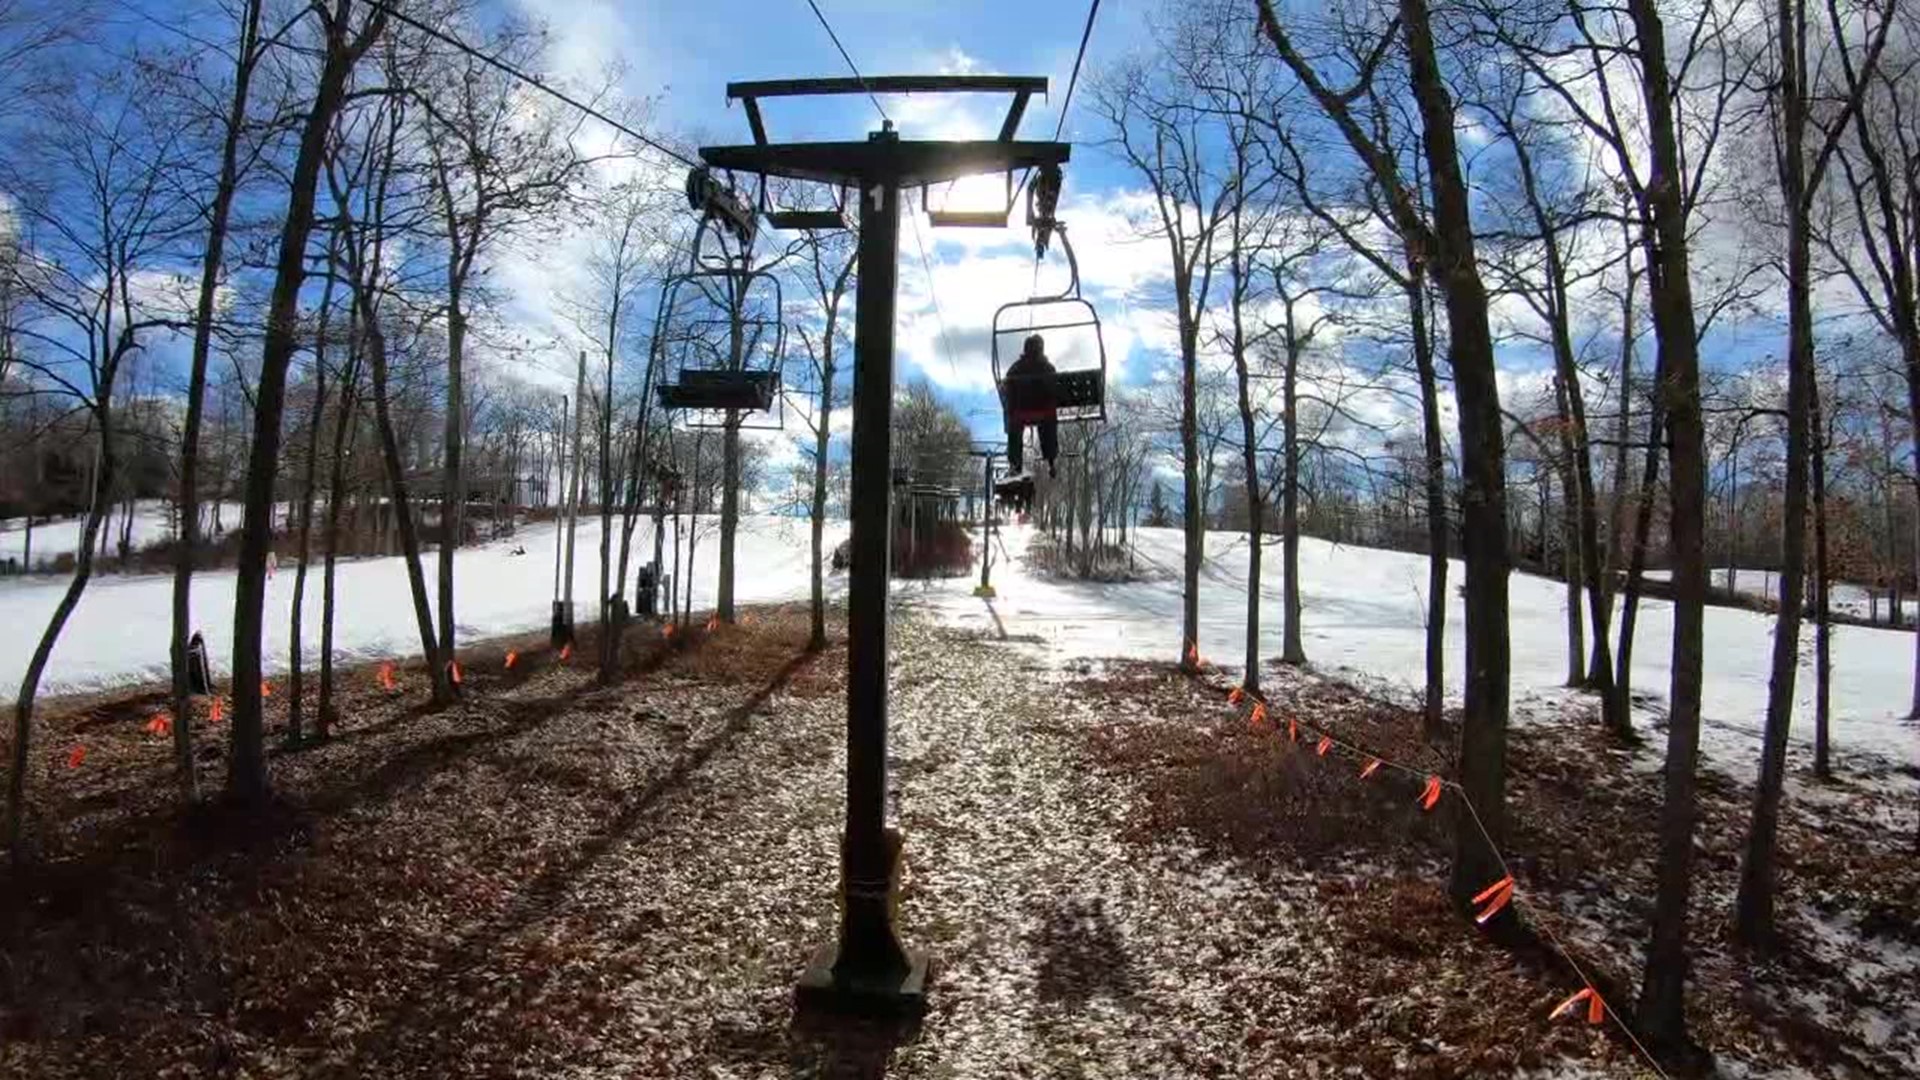 Skiers in the Poconos are getting back into the swing of things. Friday was opening day for quite a few mountains.